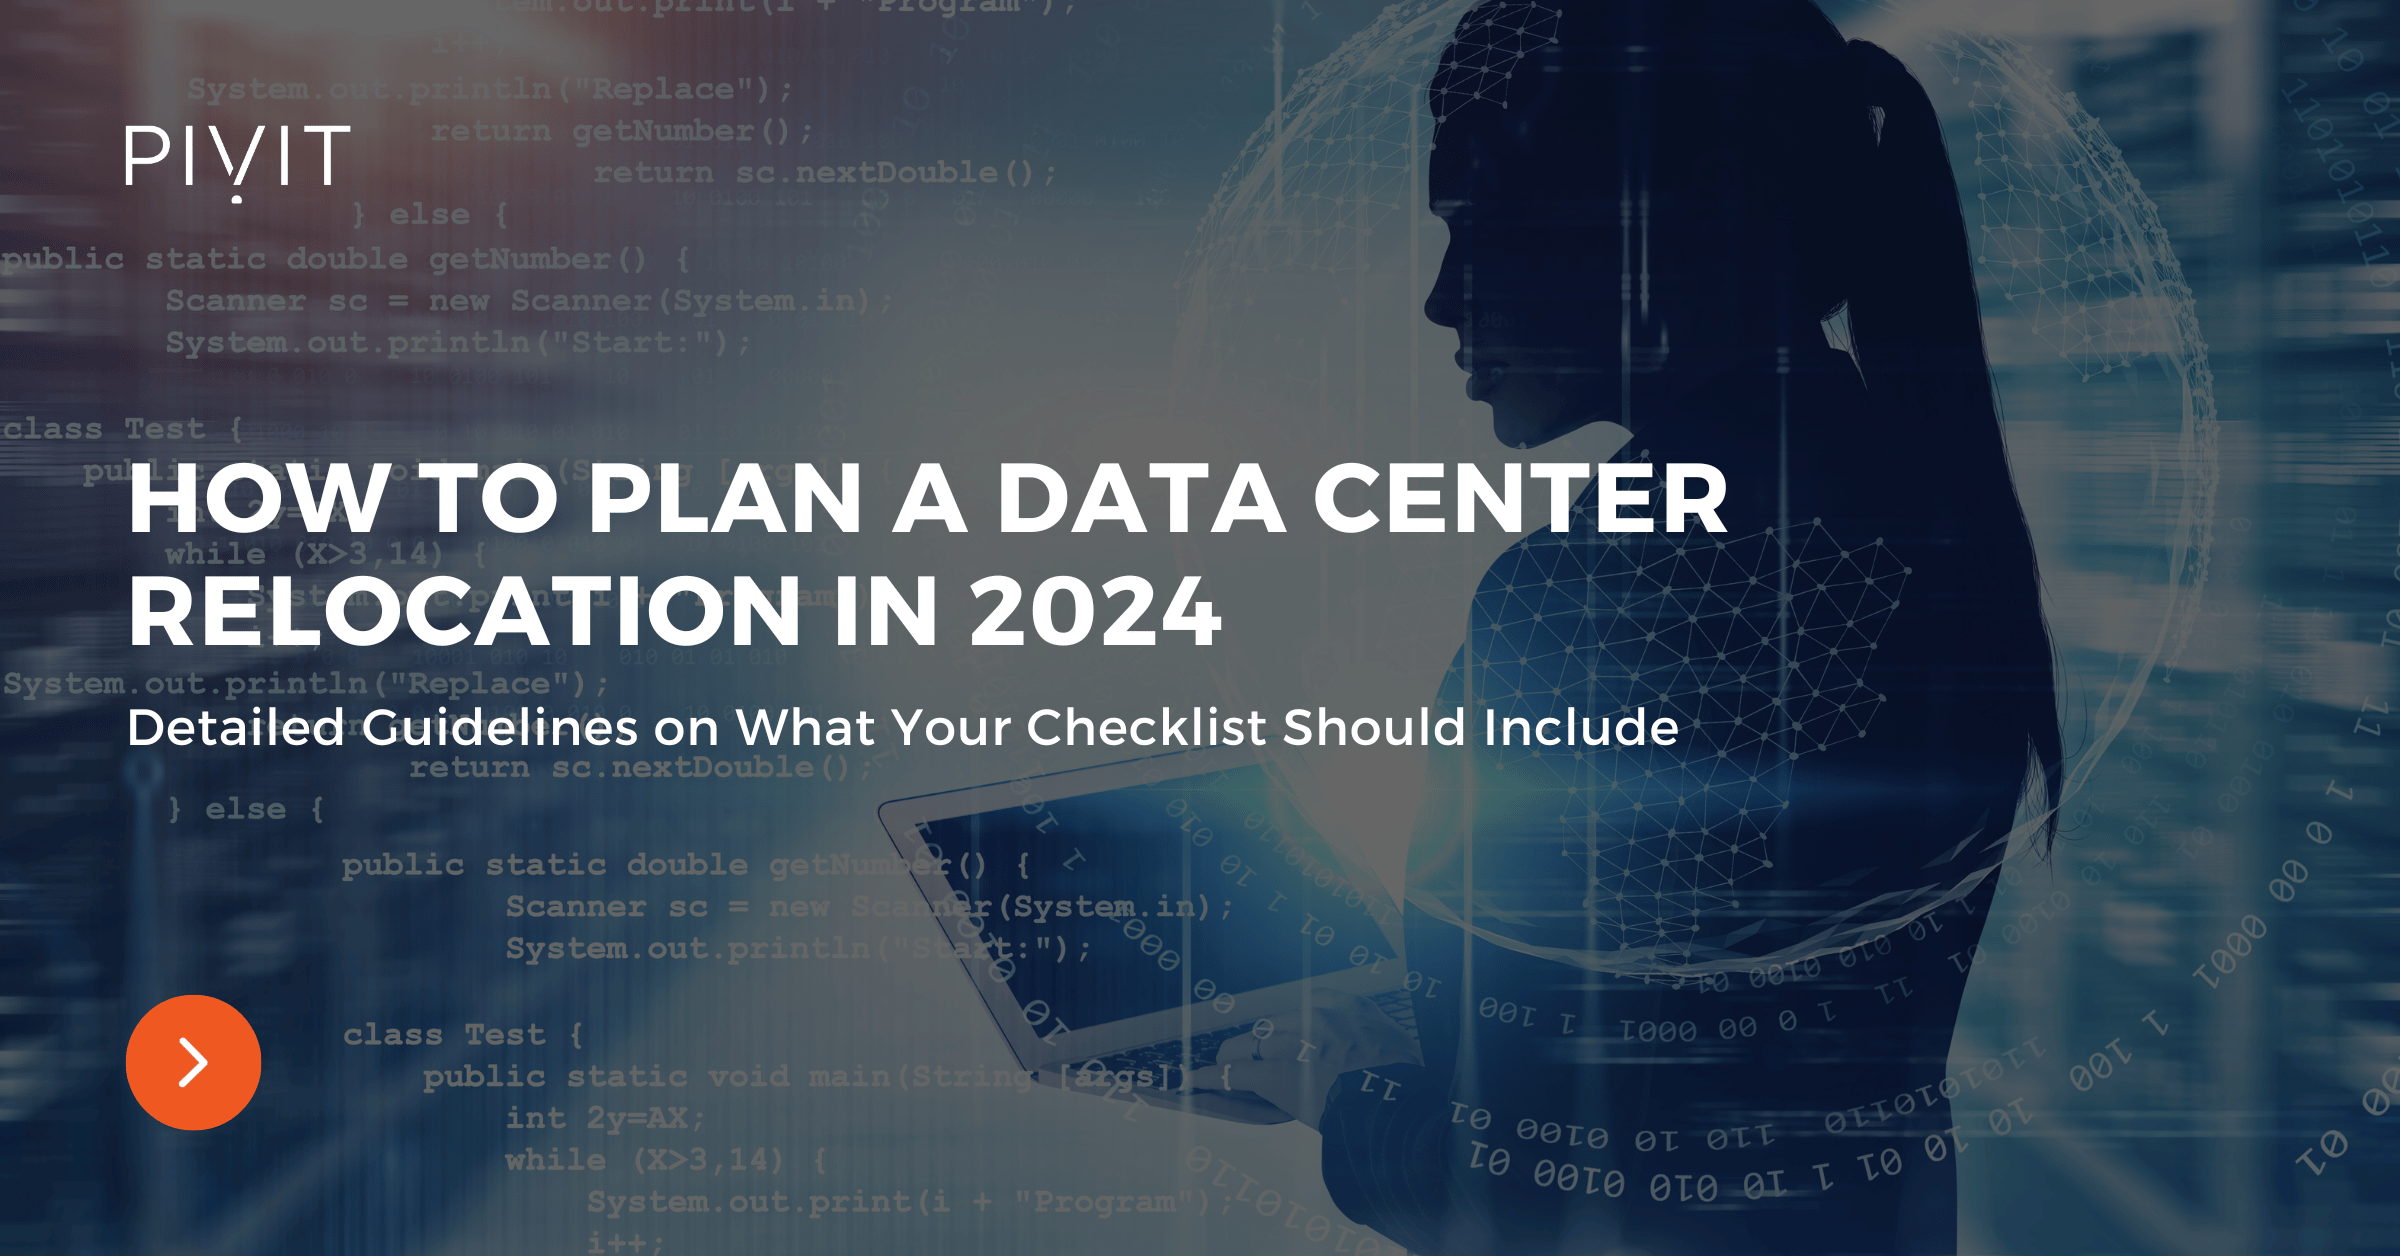 How to Plan a Data Center Relocation in 2024 - Detailed Guidelines on What Your Checklist Should Include